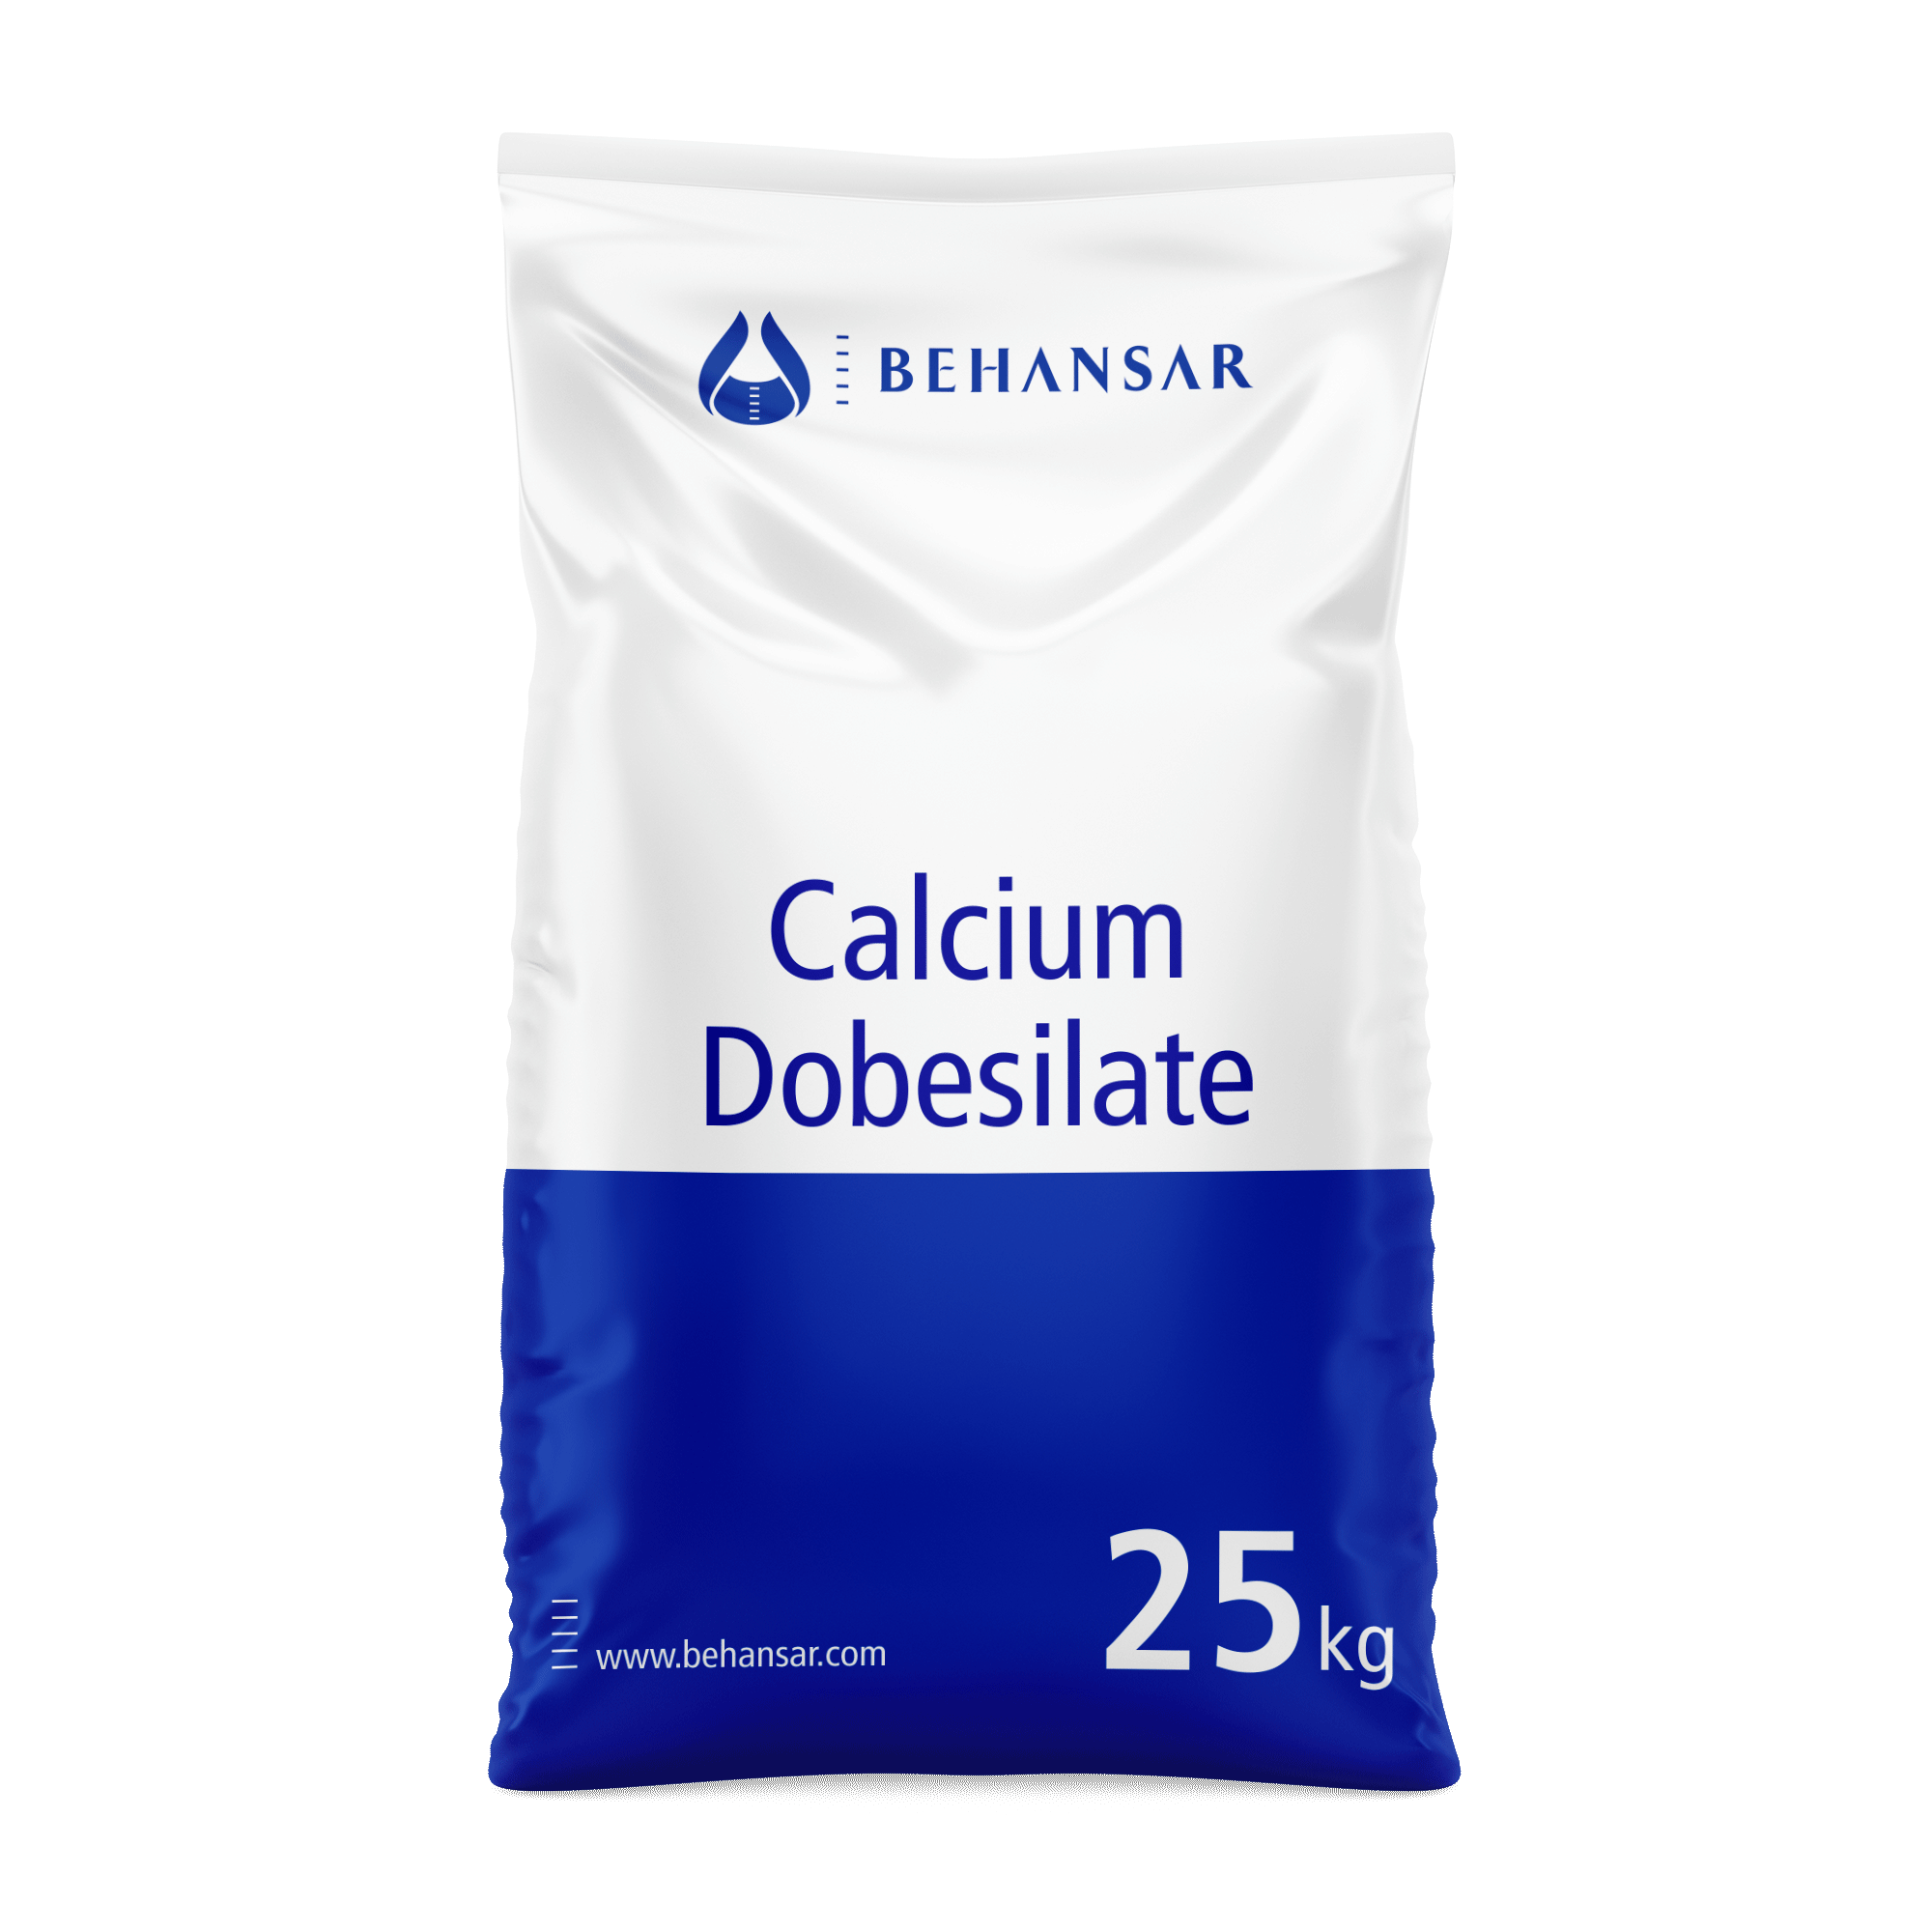 Calcium Dobesilate is one of the products of Behansar Co